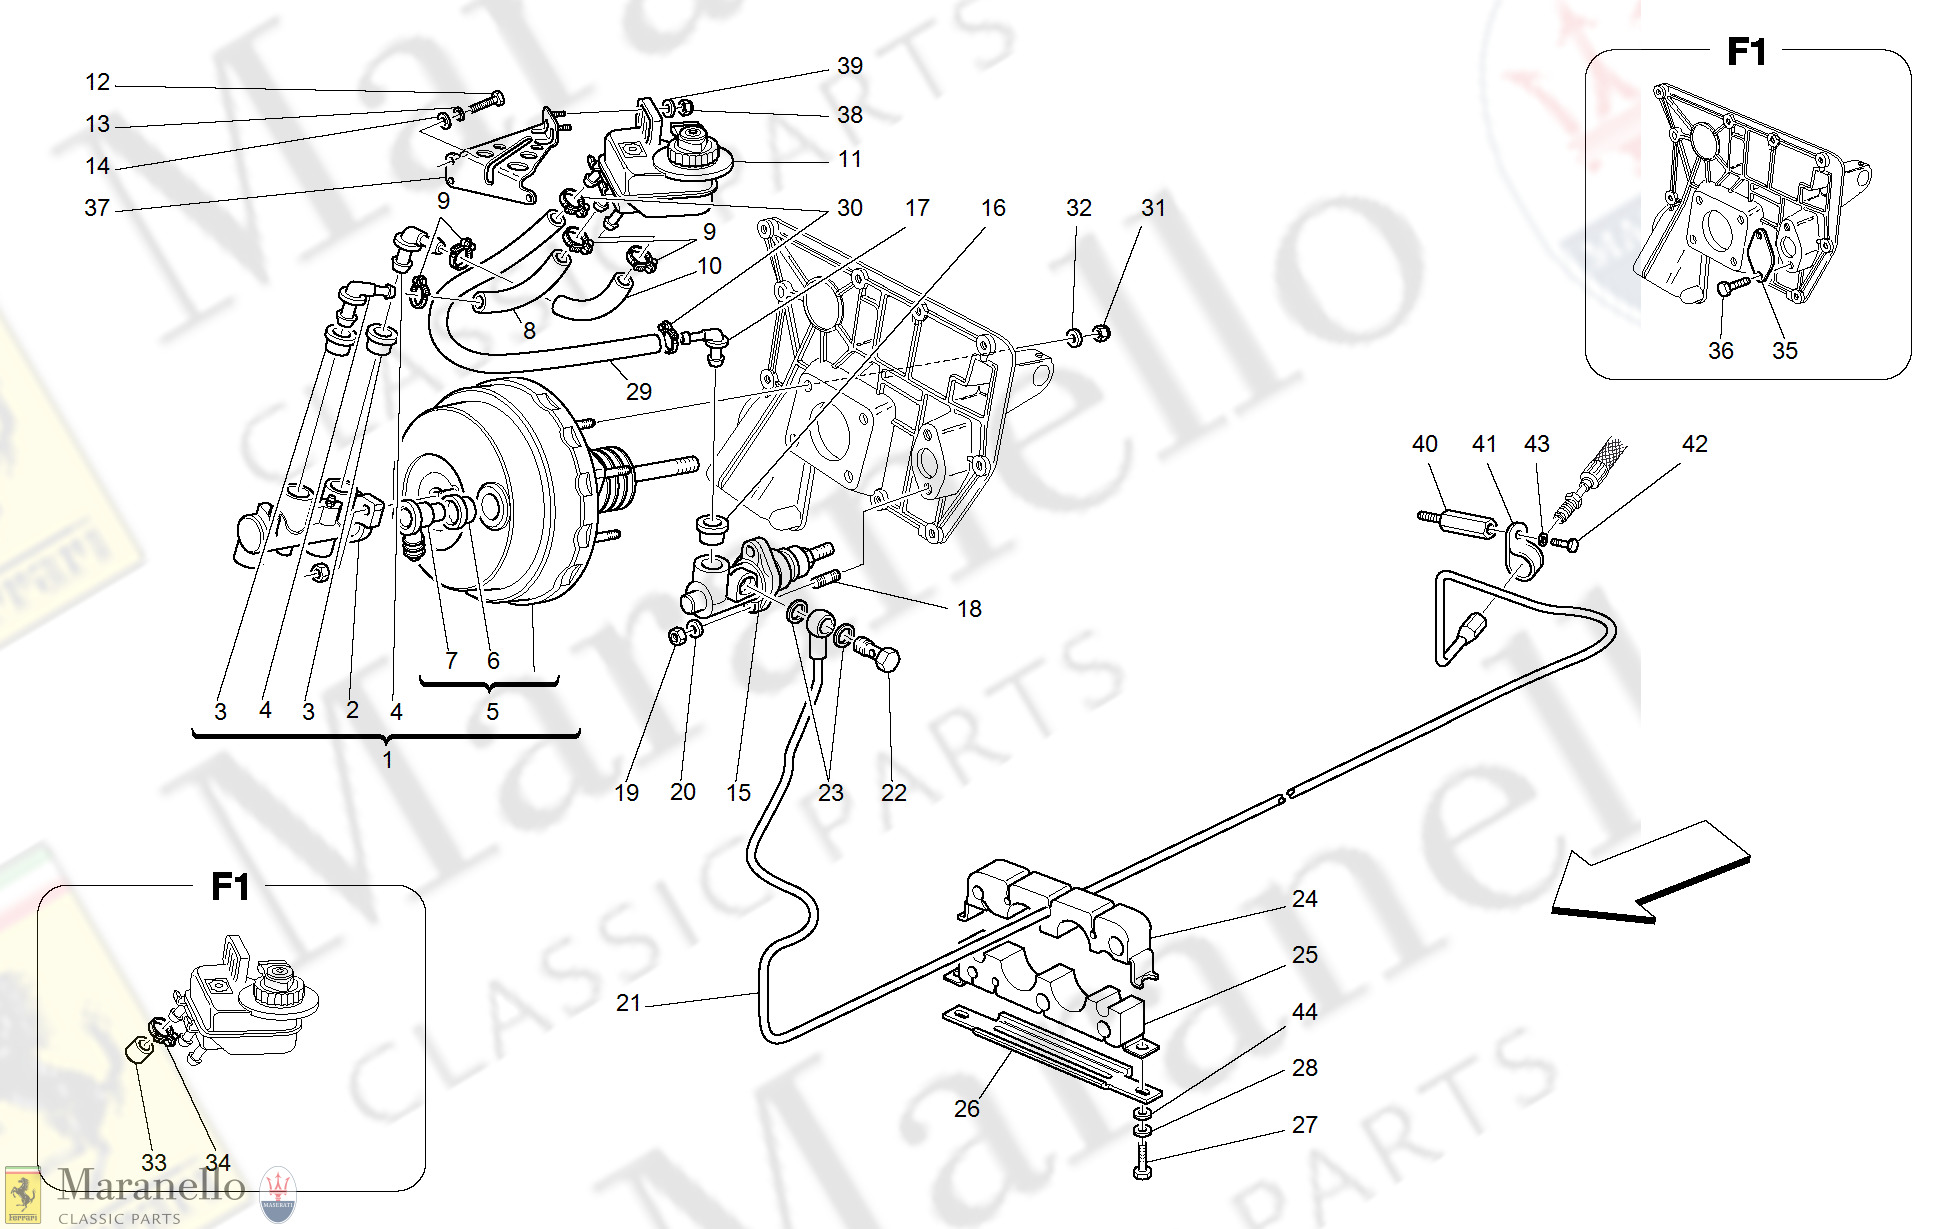 040 - Brakes And Clutch Hydraulic Controls -Valid For Gd-